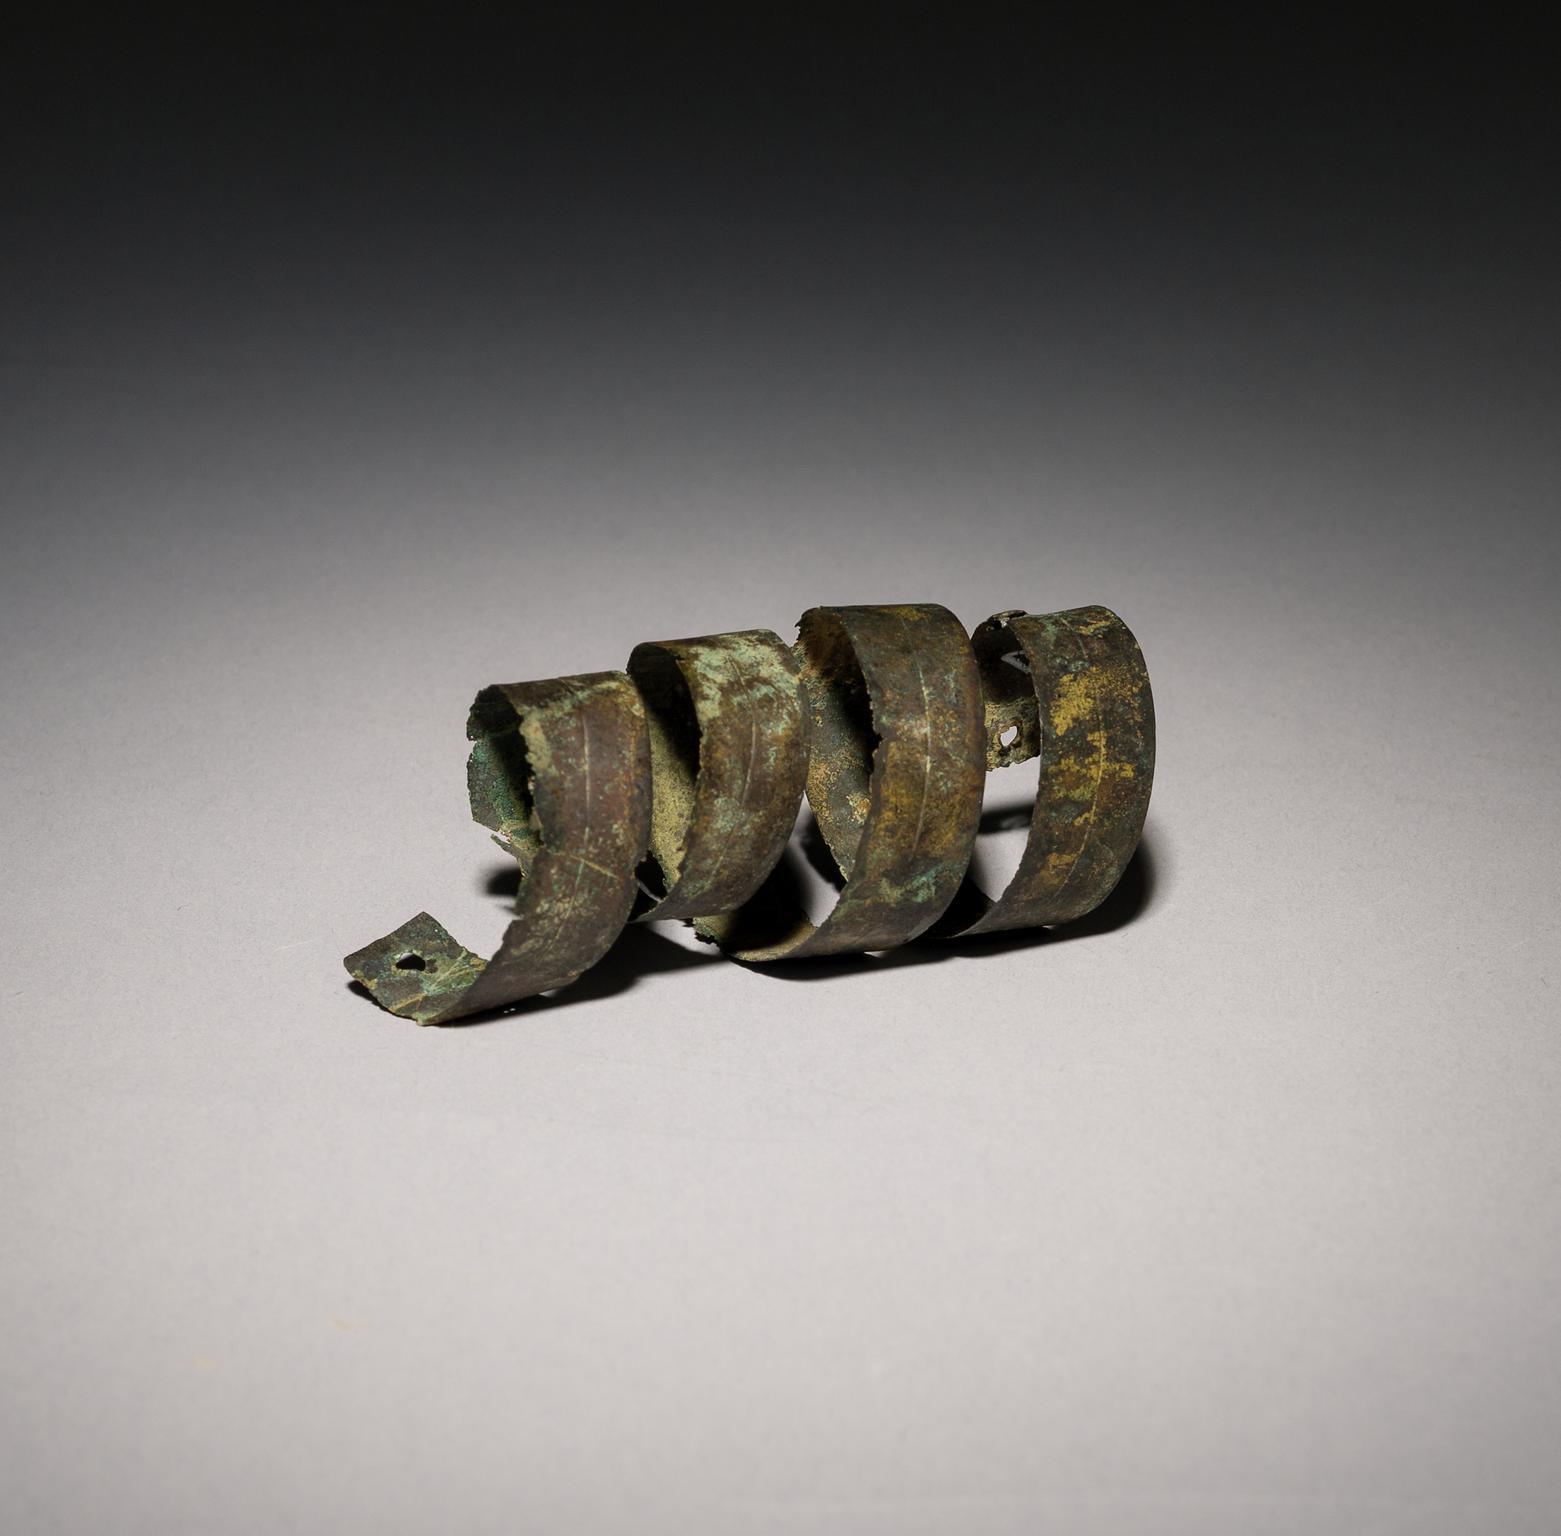 Late Iron Age copper alloy object